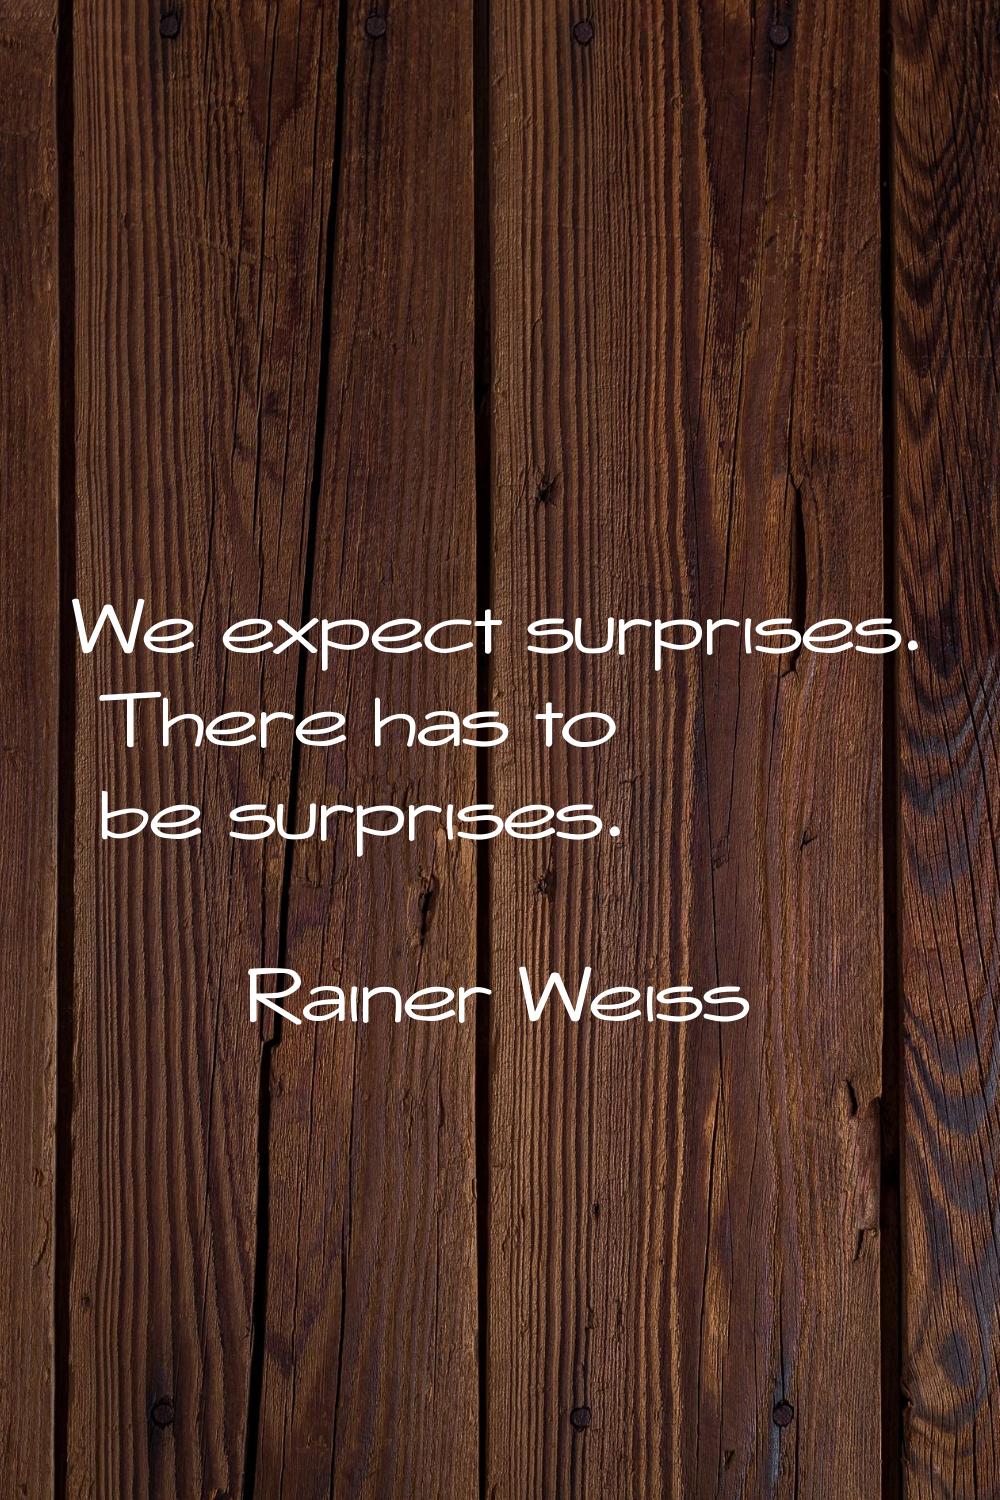 We expect surprises. There has to be surprises.